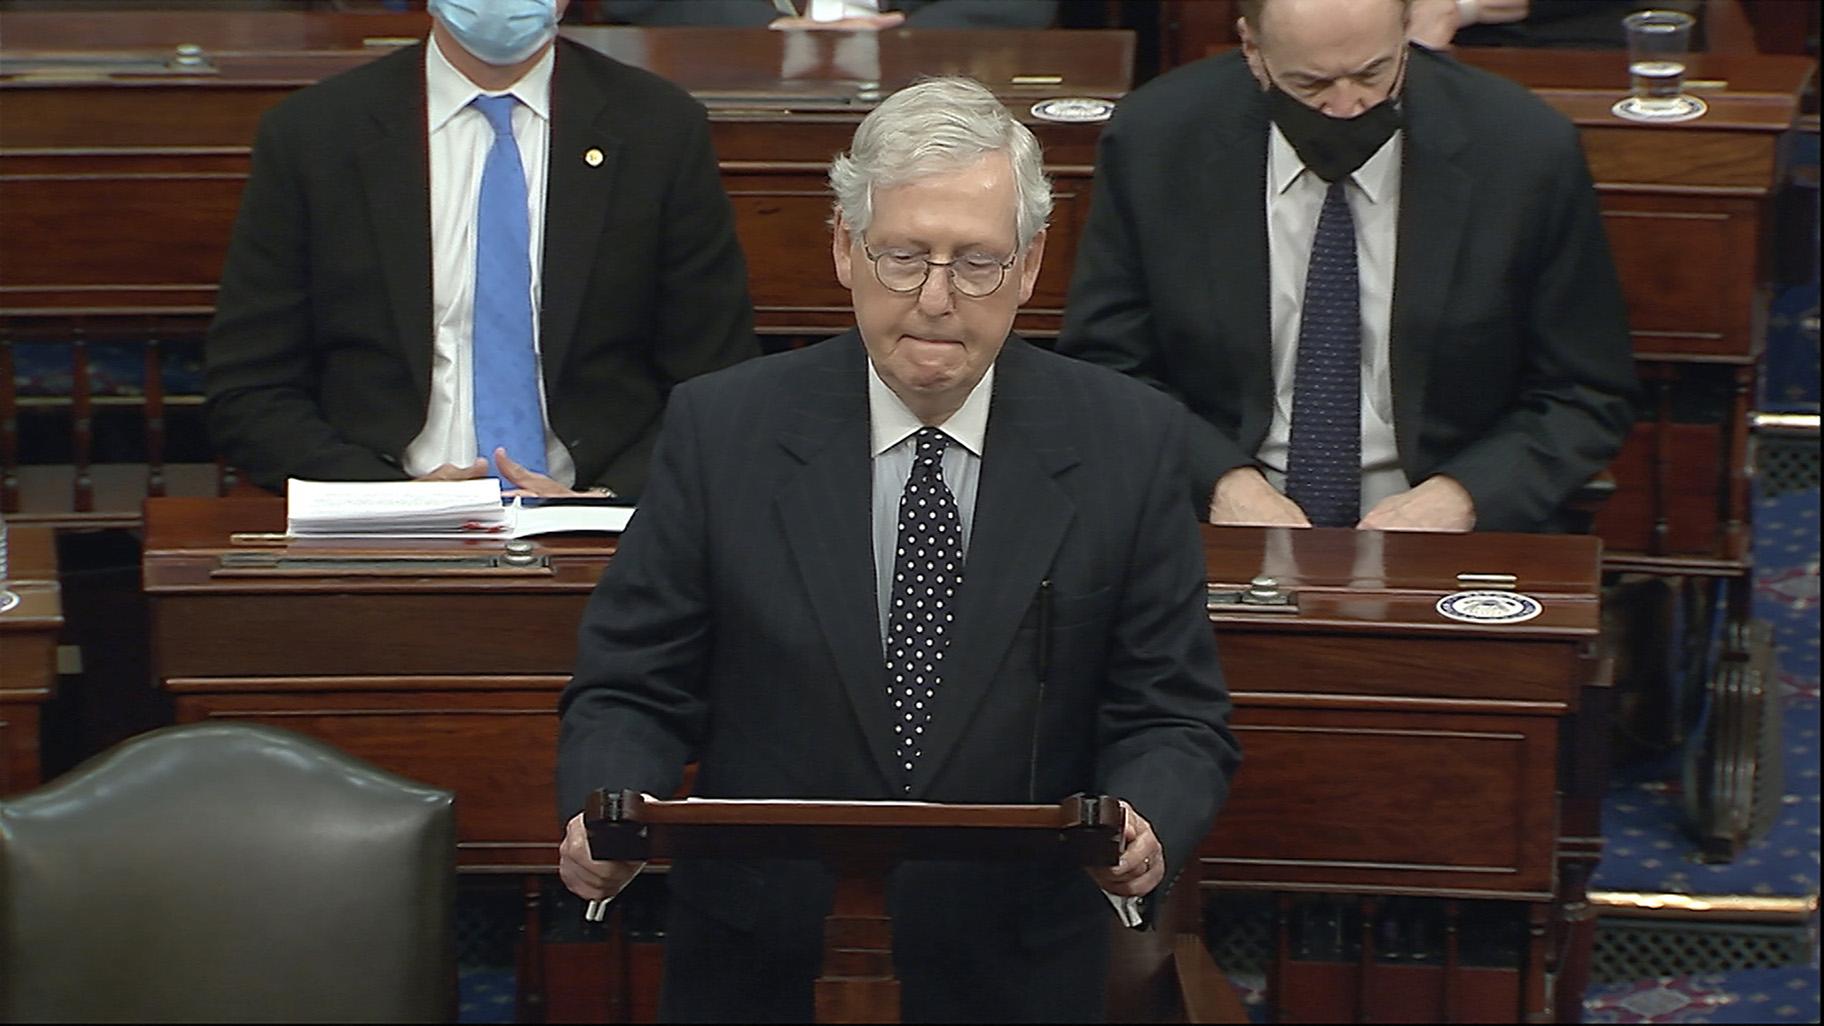 In this image from video, Senate Majority Leader Mitch McConnell of Ky., speaks as the Senate reconvenes after protesters stormed into the U.S. Capitol on Wednesday, Jan. 6, 2021. (Senate Television via AP)